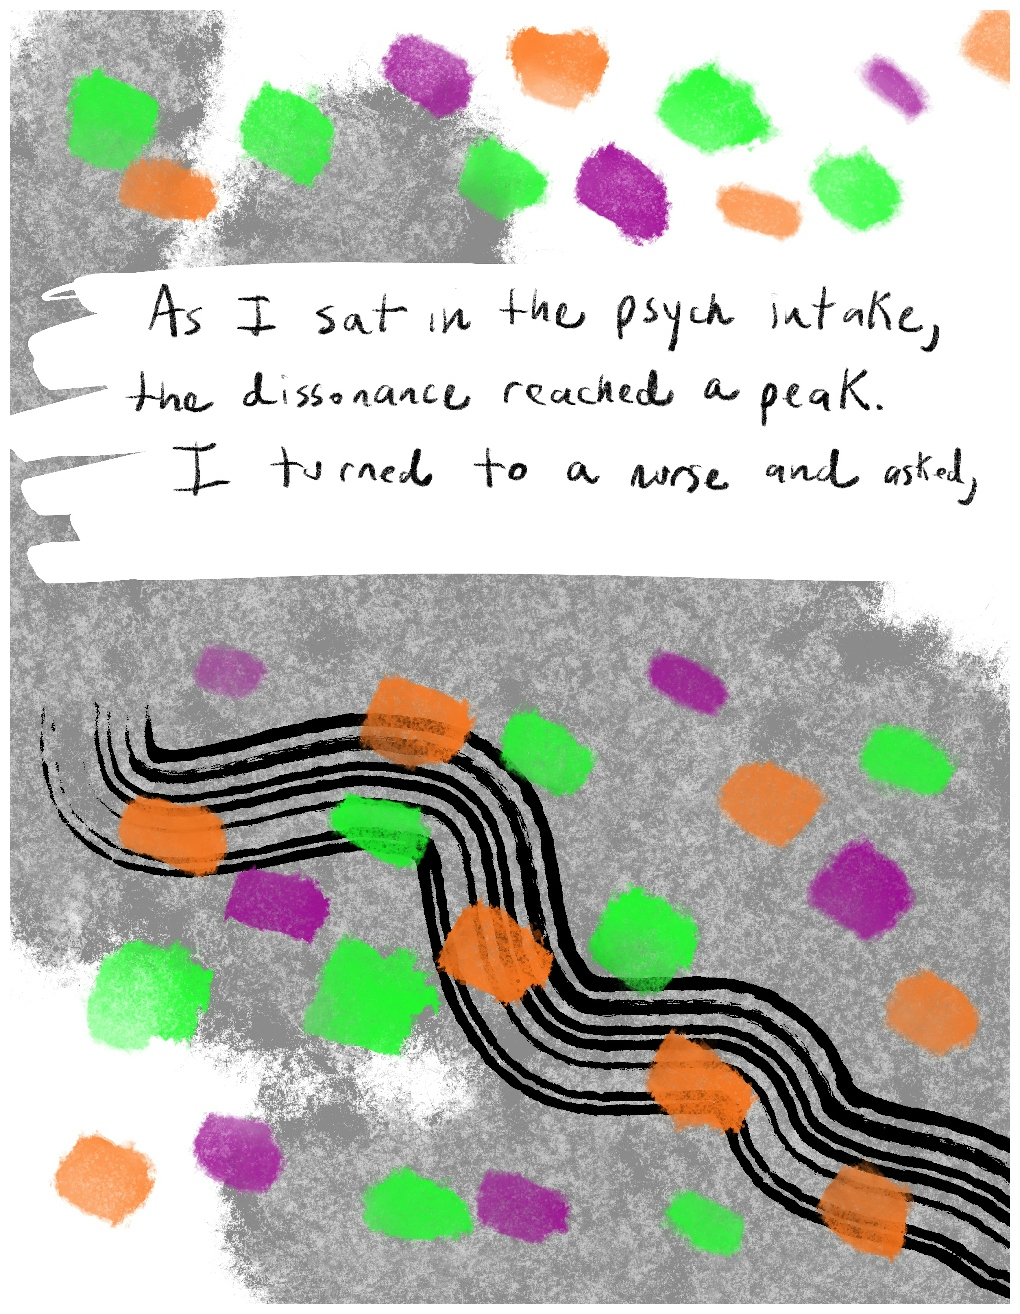 Panel one of a four-panel comic called 'A glimpse of reality', consisting of black line drawing, colour paint effects on a grey and white background. Six wavy black lines undulate across the bottom half of the panel in parallel with each other. Green, purple and orange daubs of paint dot the the whole panel, cutting across the wavy lines. In the top half of the panel handwritten text against a white background says "As I sat in the psych intake, the dissonance reached a peak. I turned to a nurse and asked,"